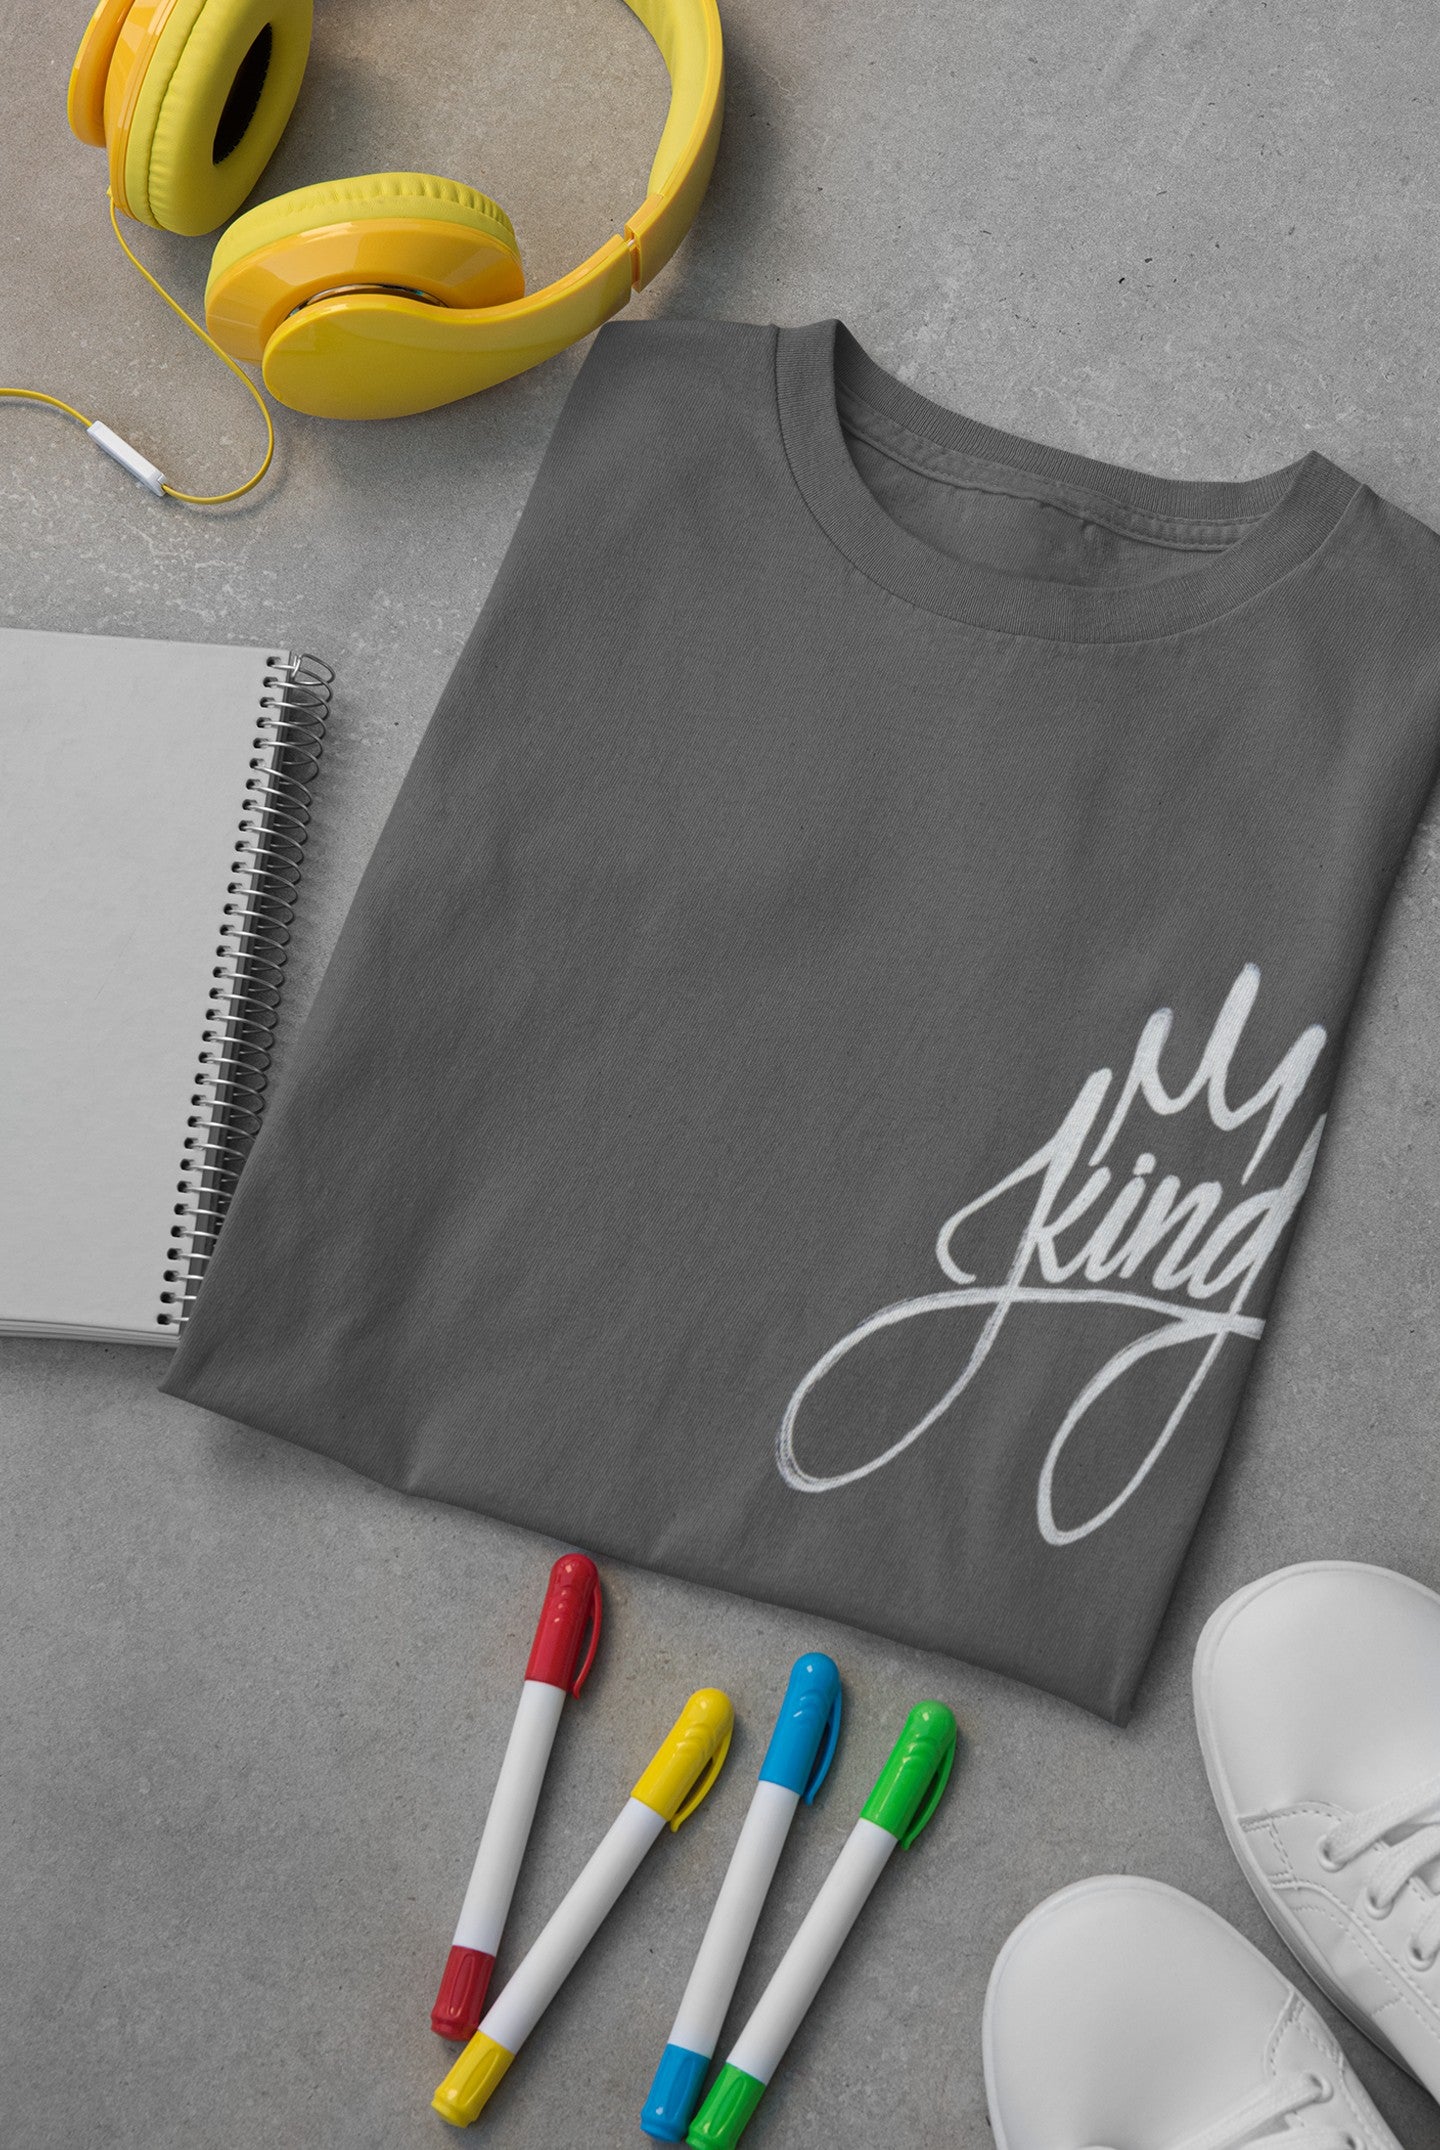 Gym T Shirt - Kind King with premium cotton Lycra. The Sports T Shirt by Strong Soul